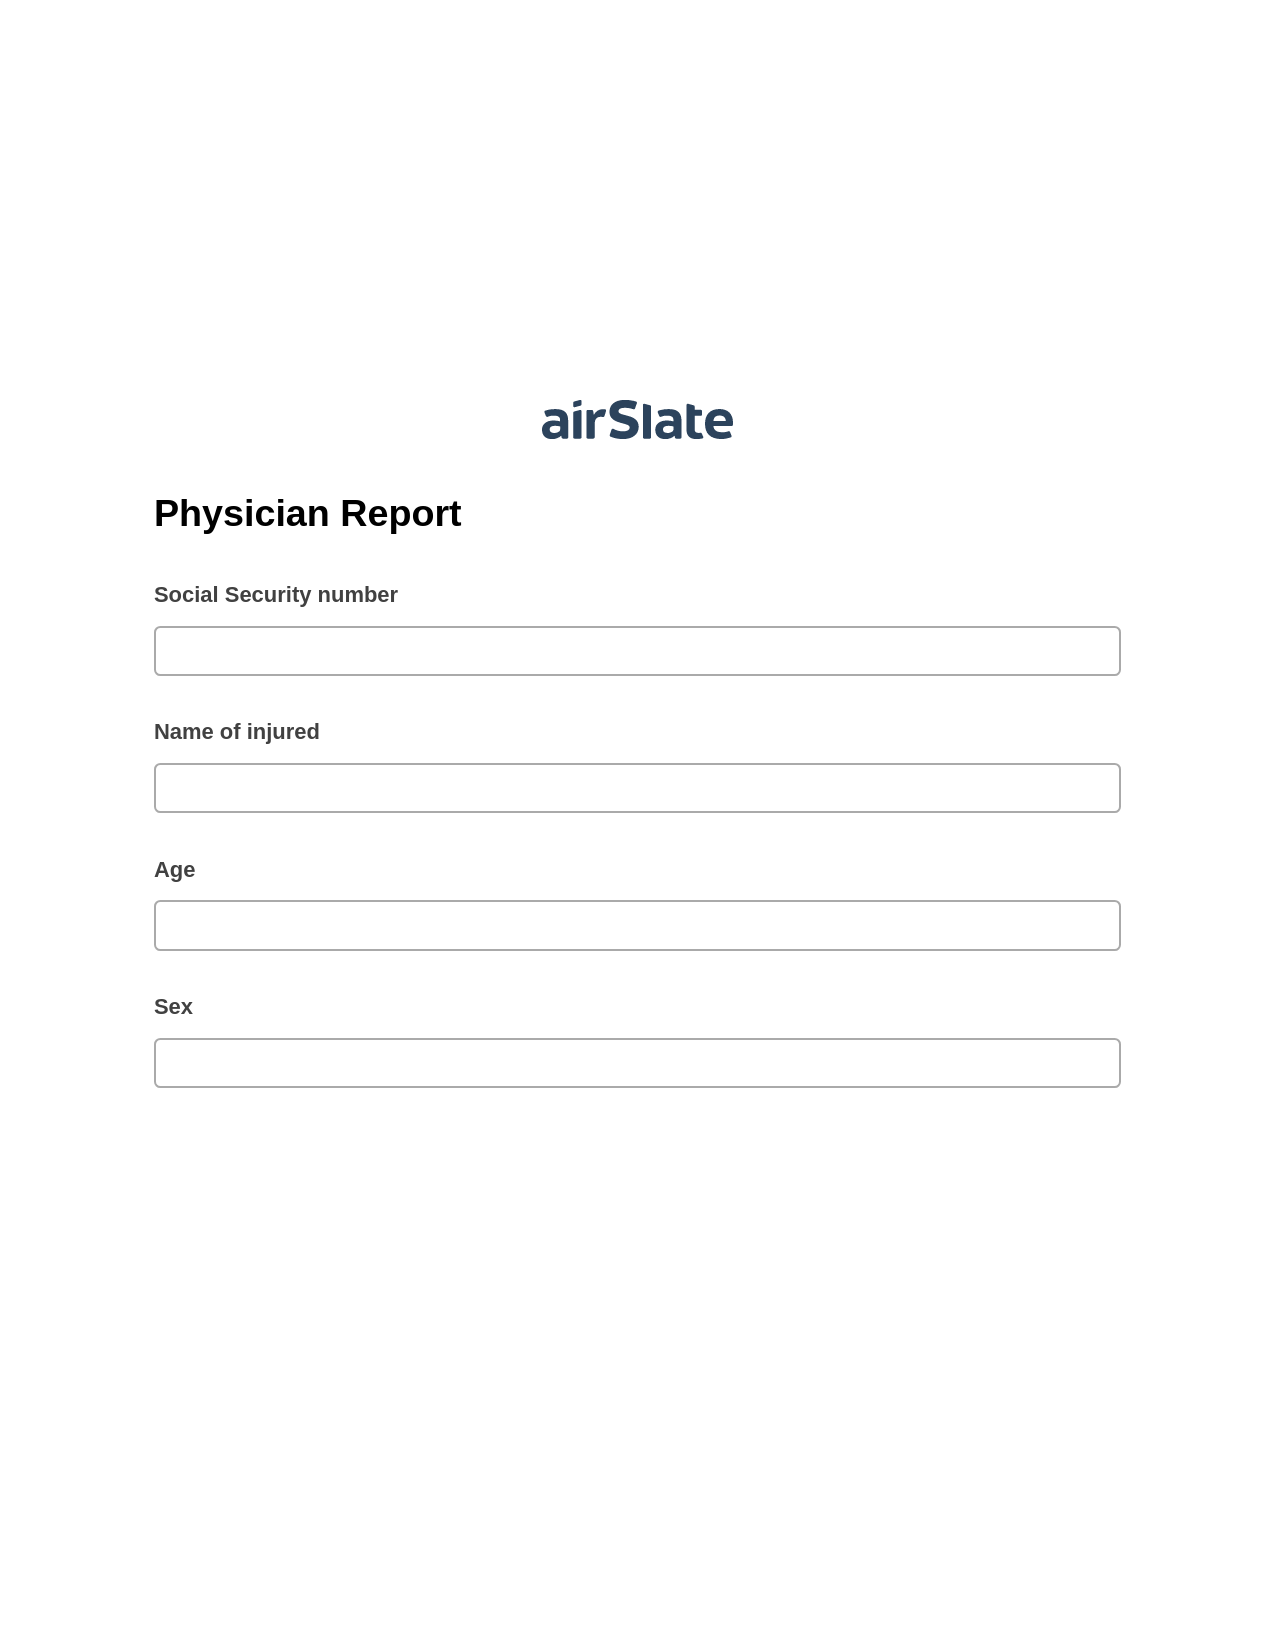 Multirole Physician Report Pre-fill Dropdowns from Airtable, Create slate addon, Archive to Box Bot